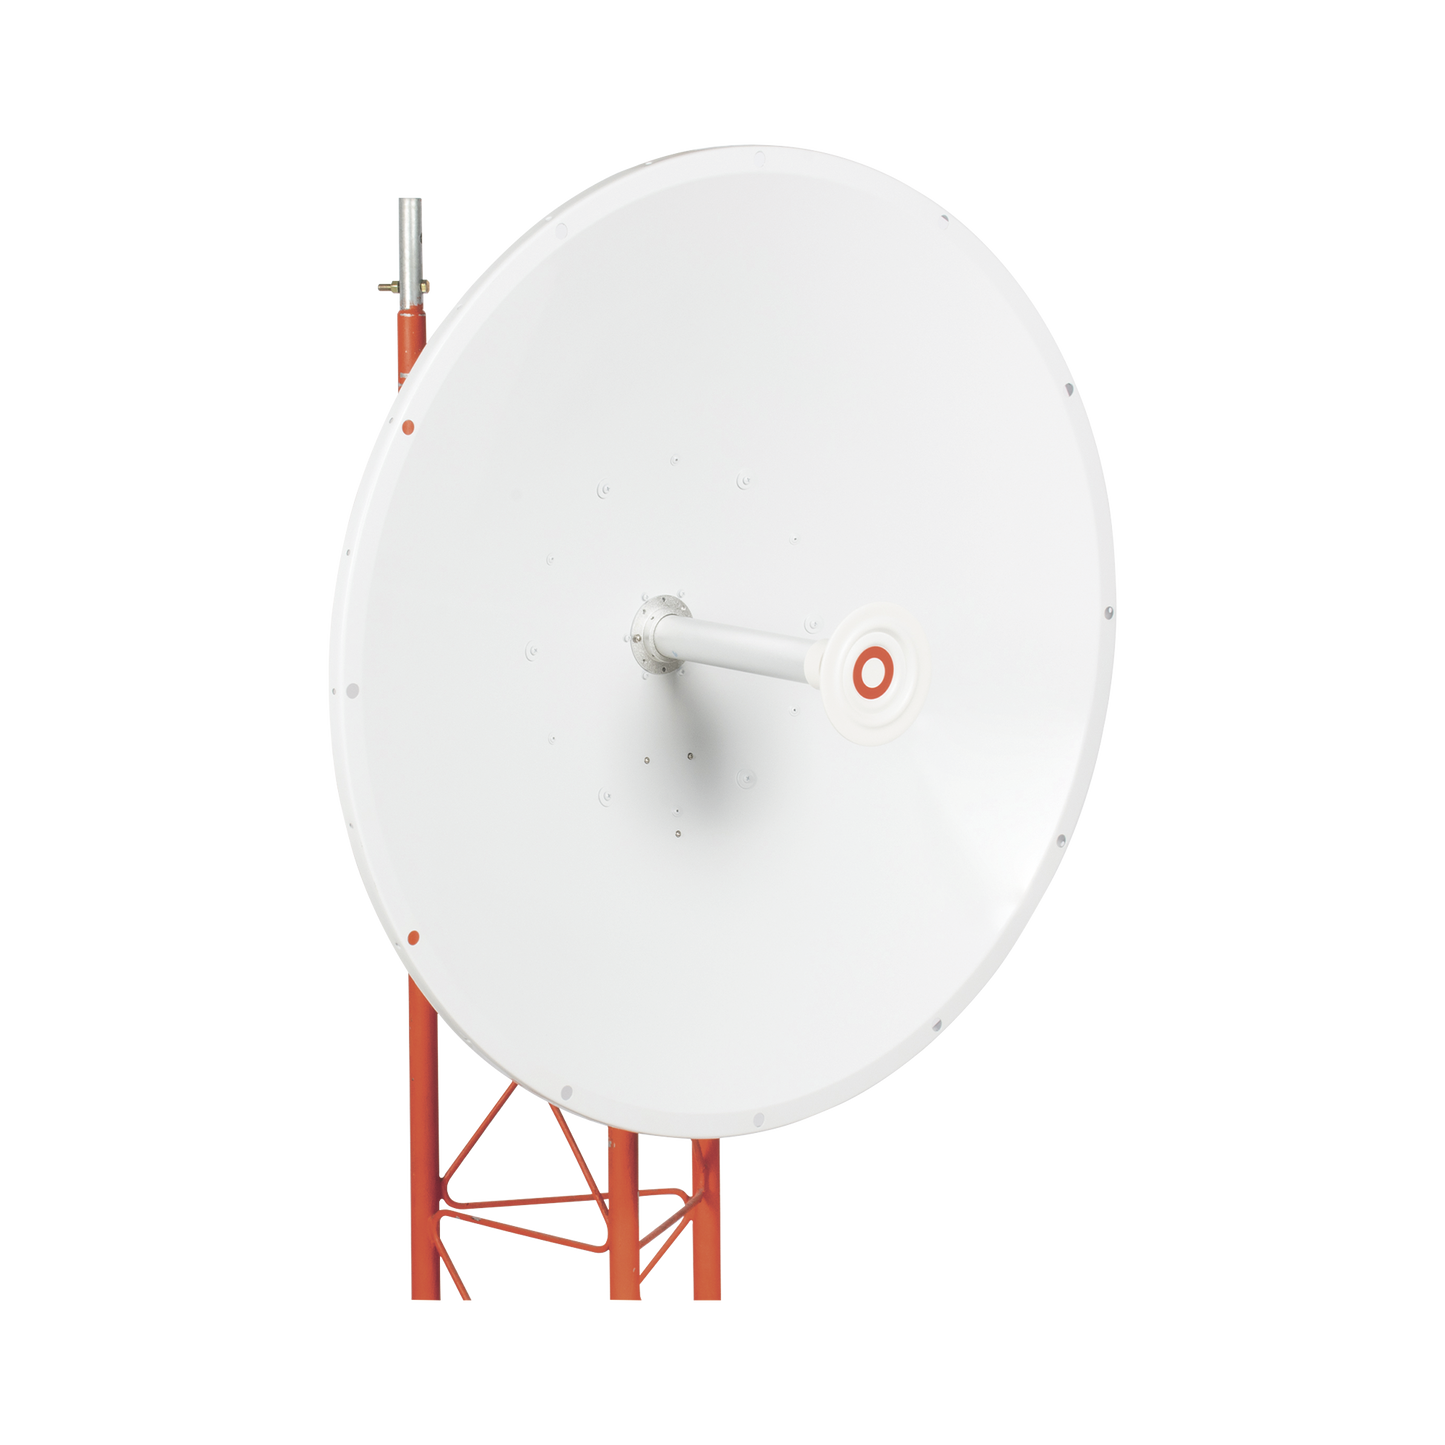 Directional antenna, 34 dBi gain, frequency range (4.9 - 7.1 MHz), 2 N-female connectors